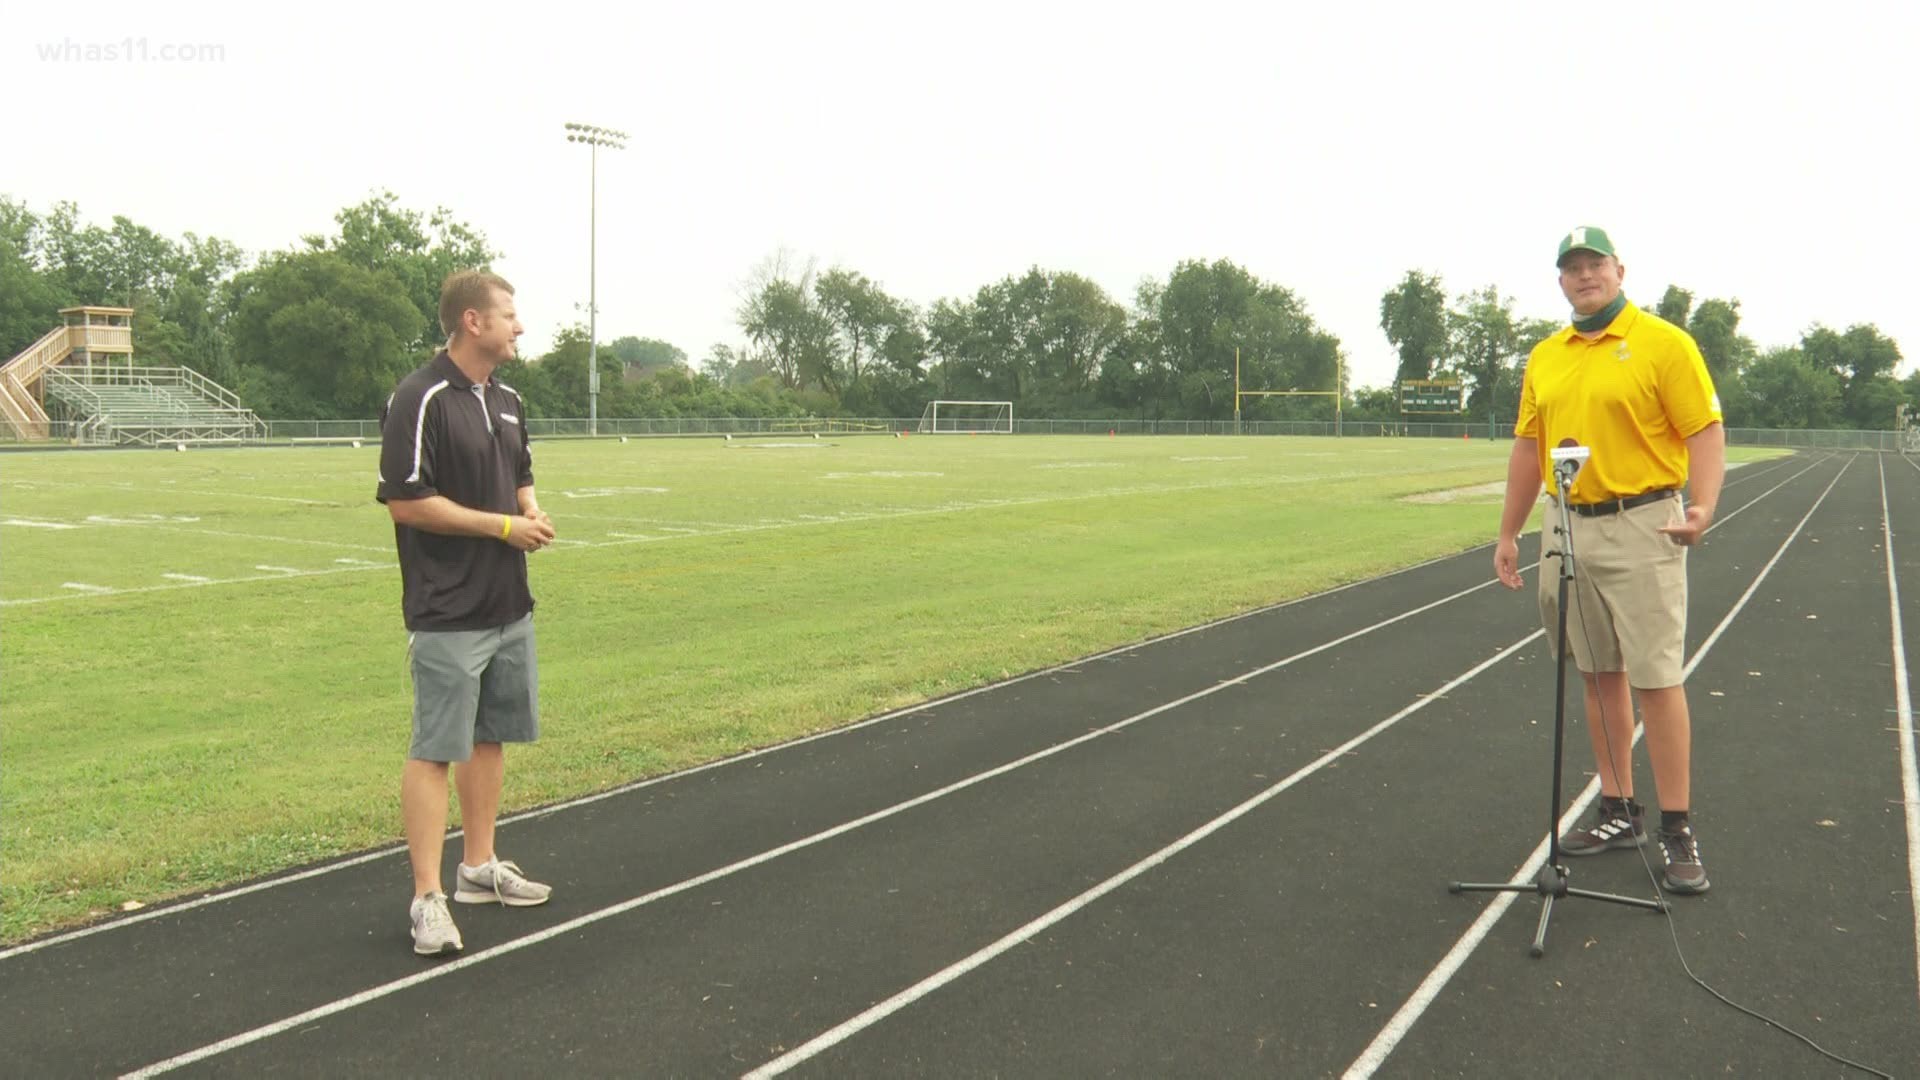 WHAS11 Sports Director Kent Spencer catches up with Eagles Head Coach Adam Billings ahead of their match-up with Bullitt Central.